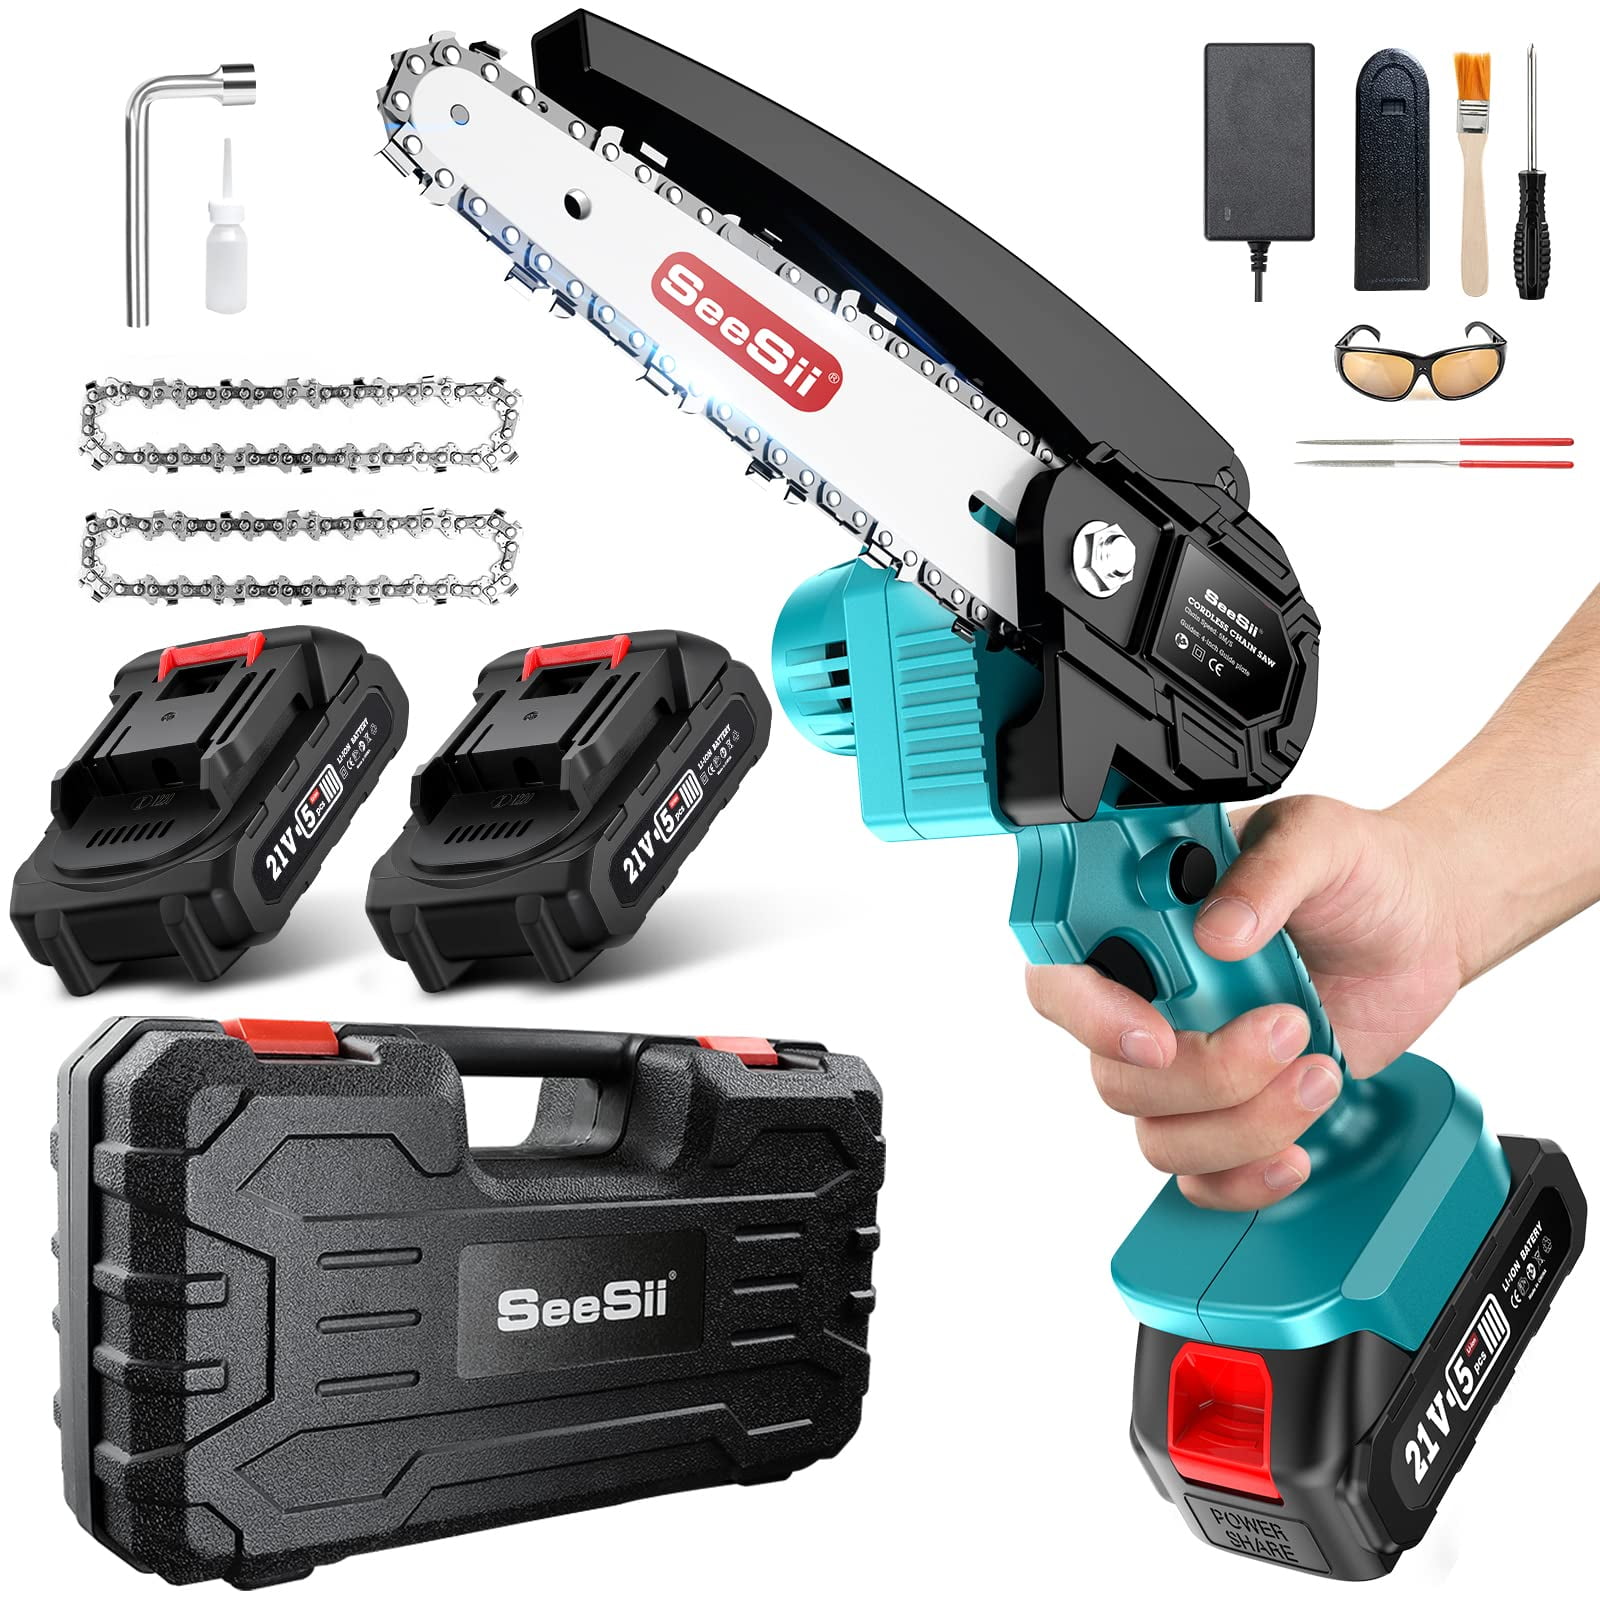 Seesii Cordless Chainsaw 6-inch, Mini Chainsaw with 2x Batteries, 2x Chains  & Safety Lock, Handheld Electric Power Chainsaw Kits Wood Cutter